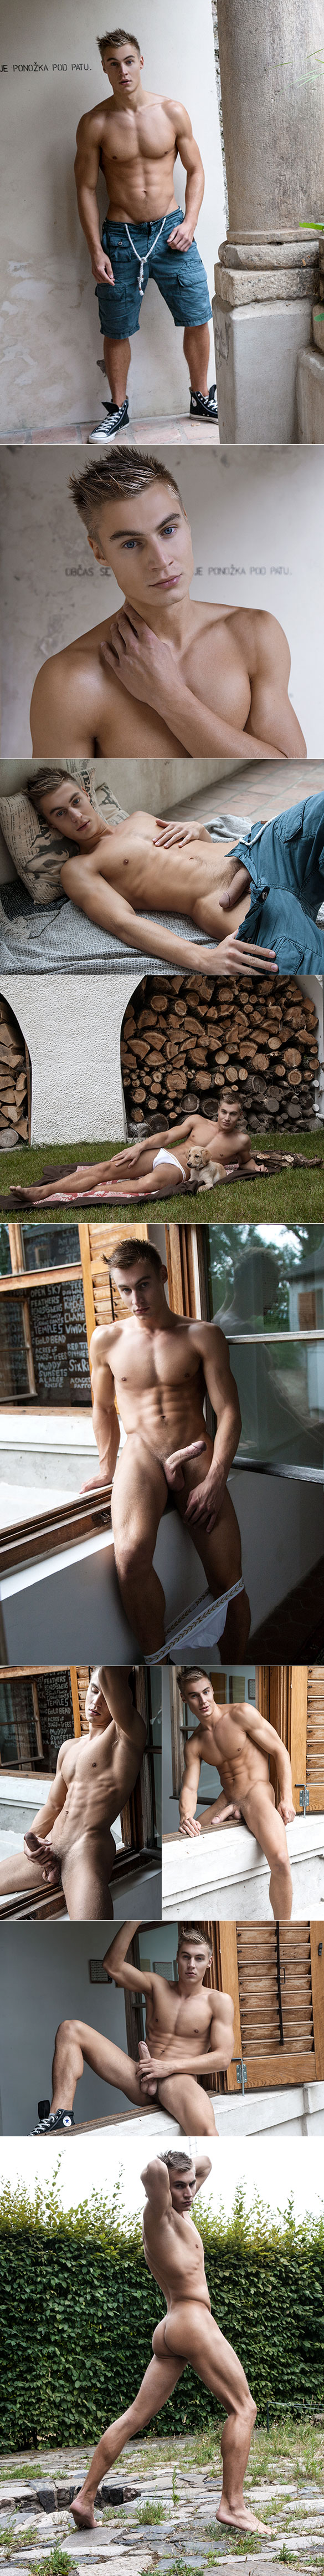 BelAmi: Nils Tatum and Torsten Ullman photographed by Rick Day